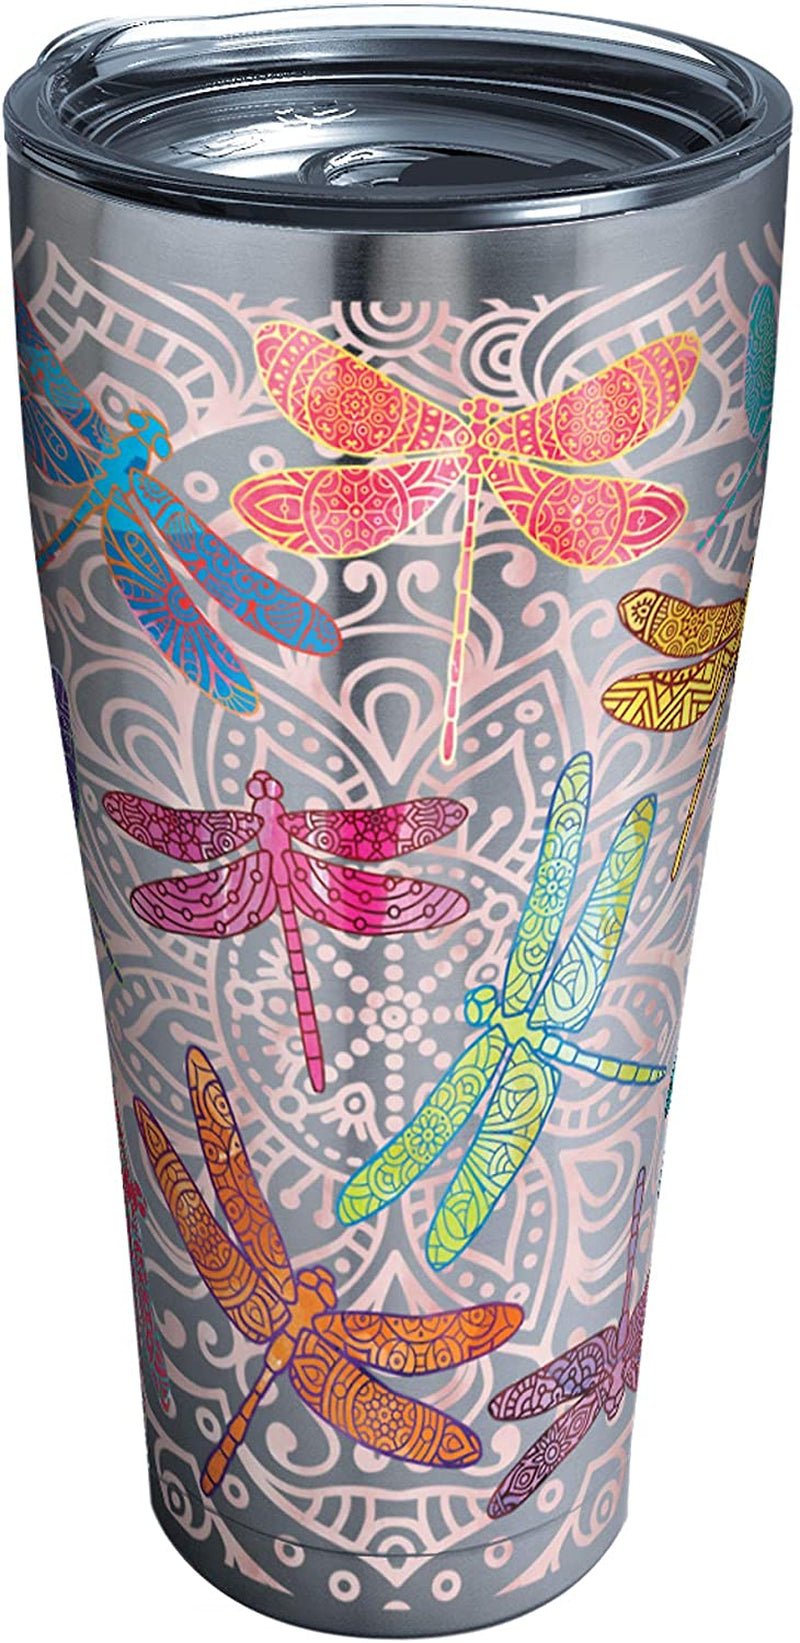 Tervis Made in USA Double Walled Dragonfly Mandala Insulated Tumbler Cup Keeps Drinks Cold & Hot, 24Oz, Classic